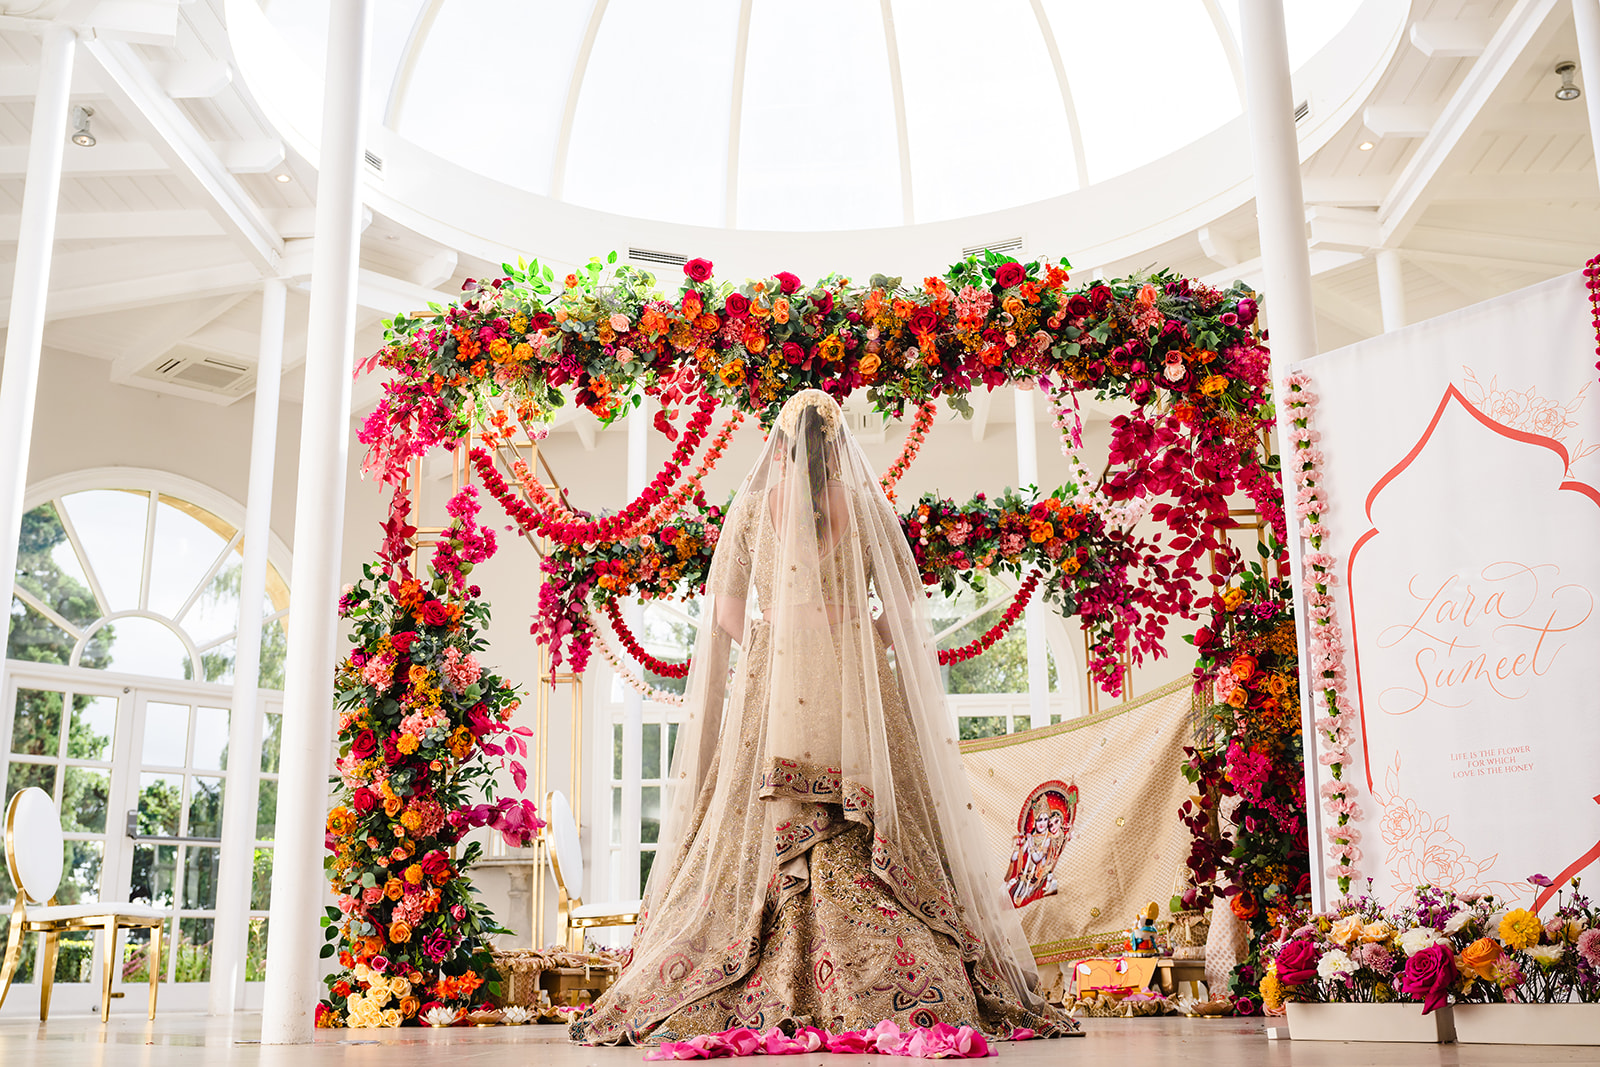 Mandup set up in the orangery at Stapleford Park hotel by Amanda Forman Photography